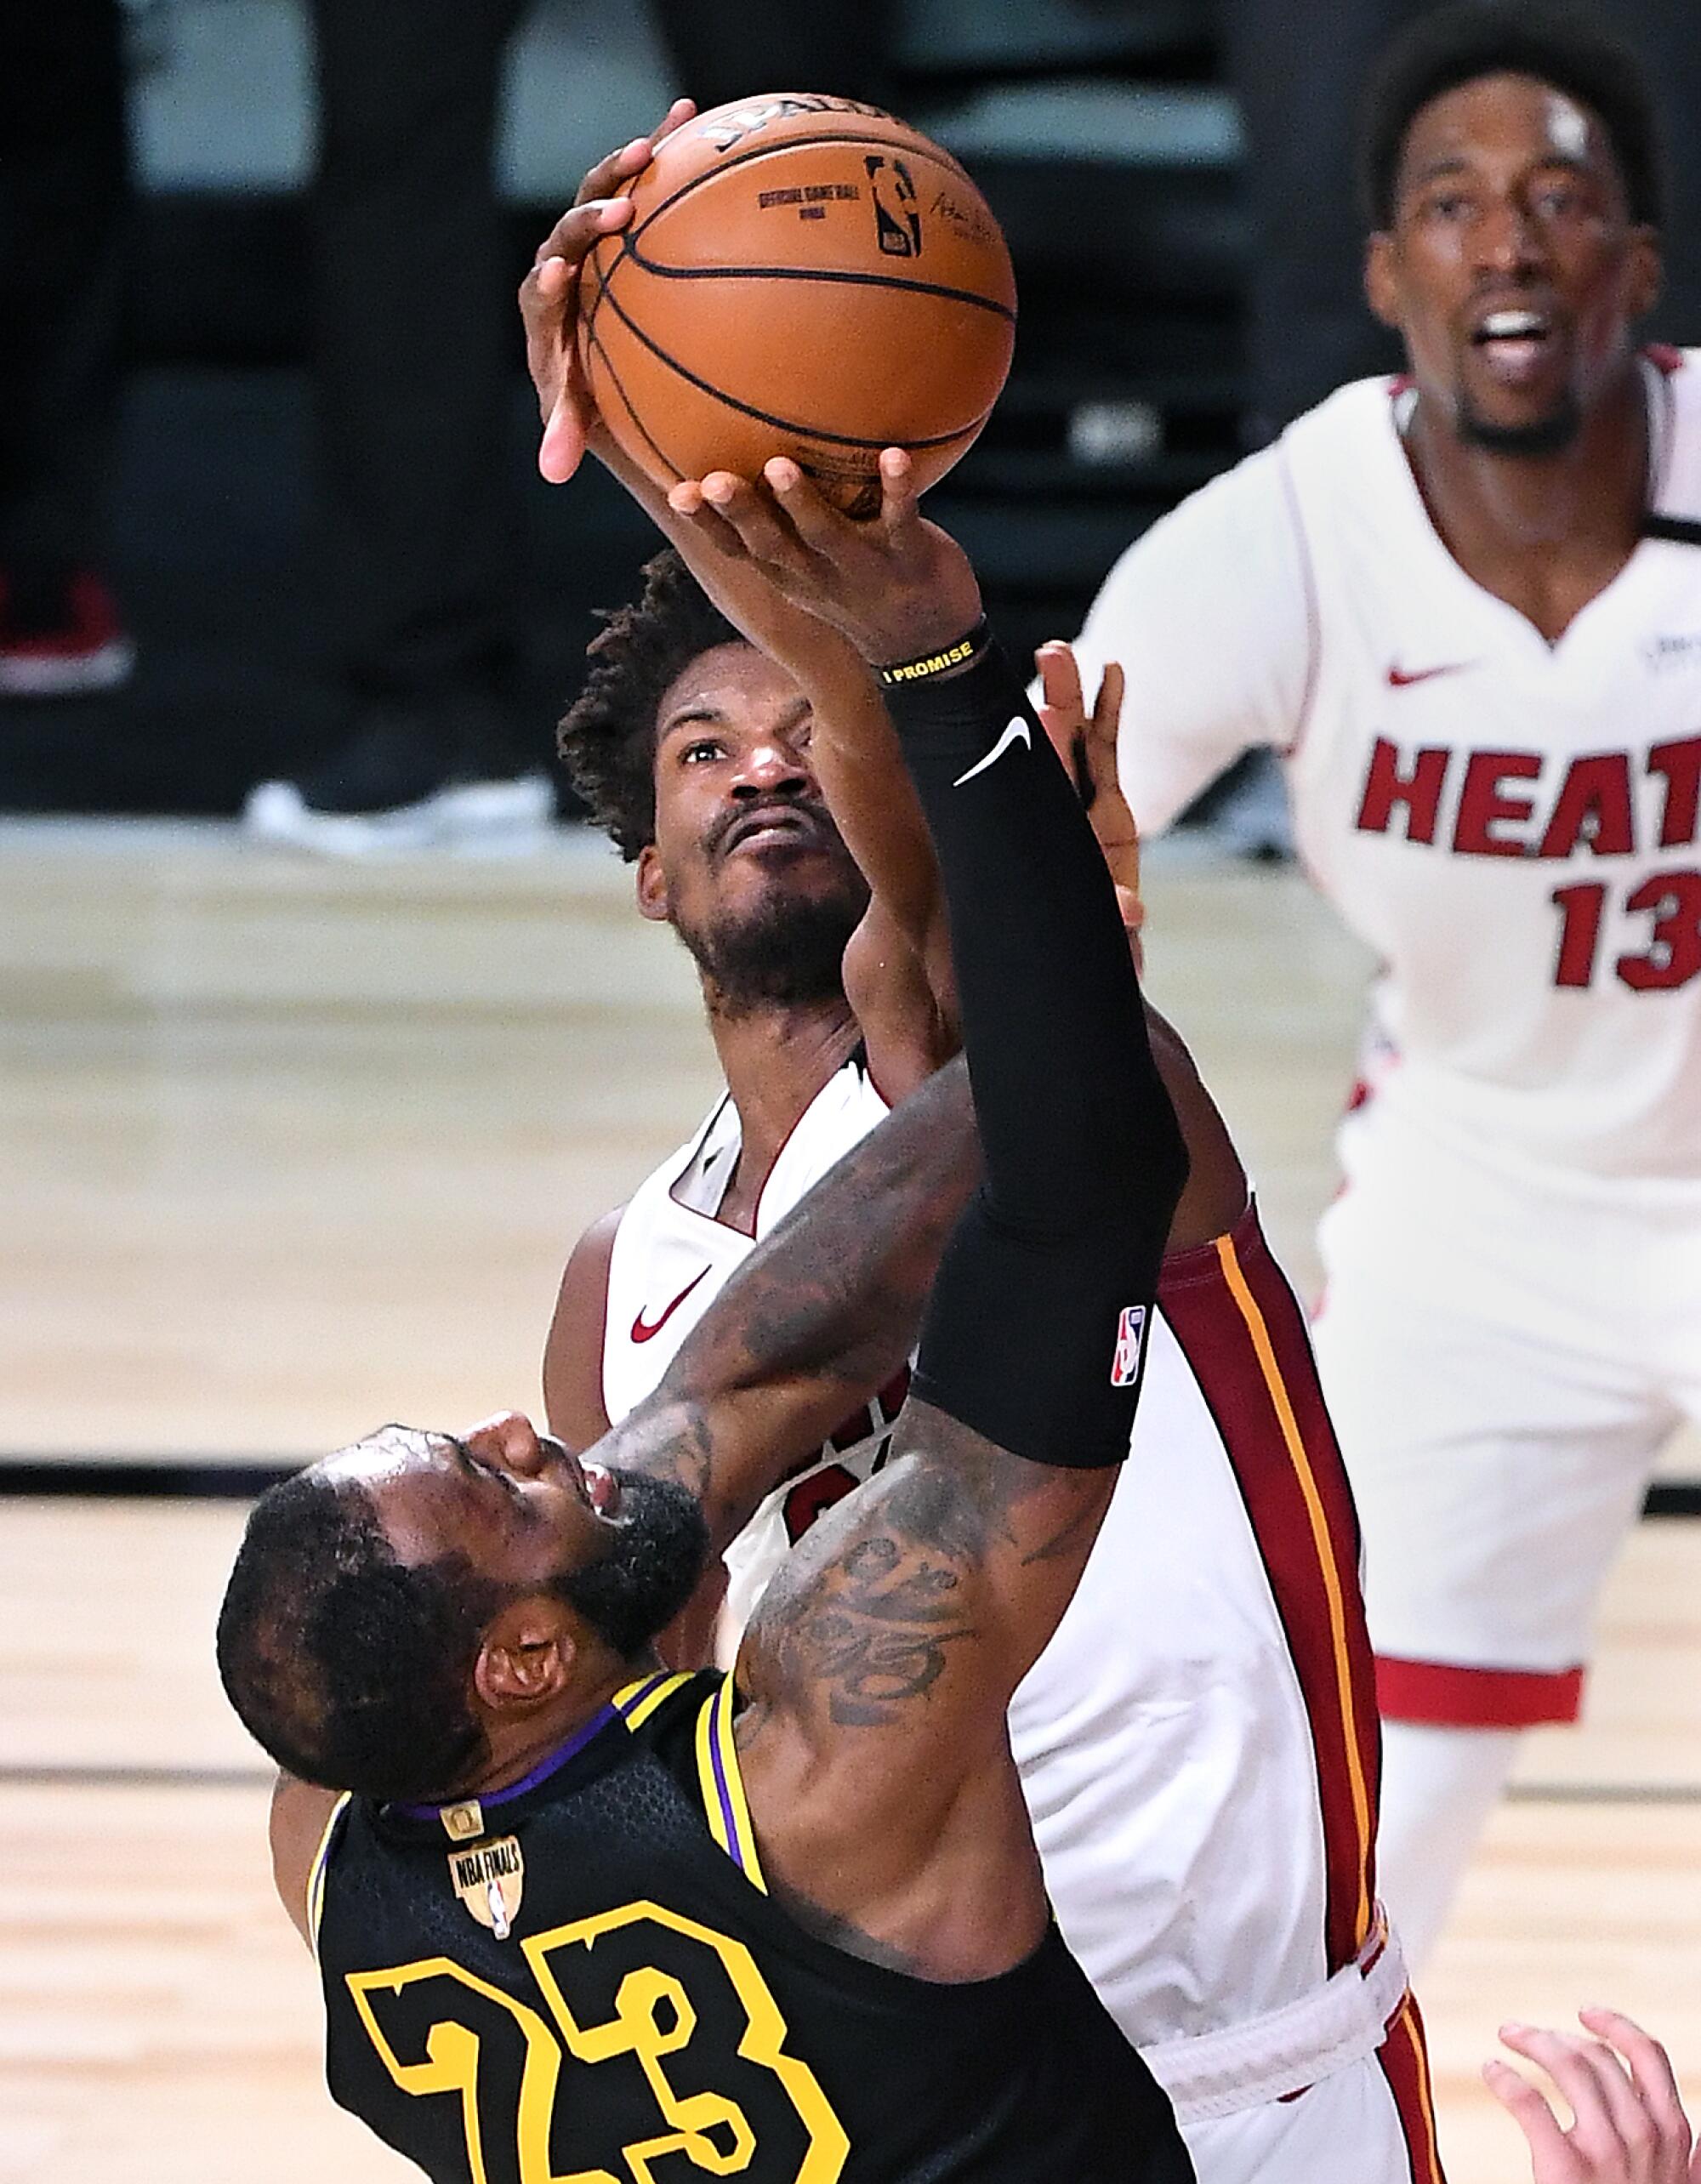 Miami Heat forward Jimmy Butler blocks a shot by Lakers forward LeBron James during Game 5 of the NBA Finals on Friday.